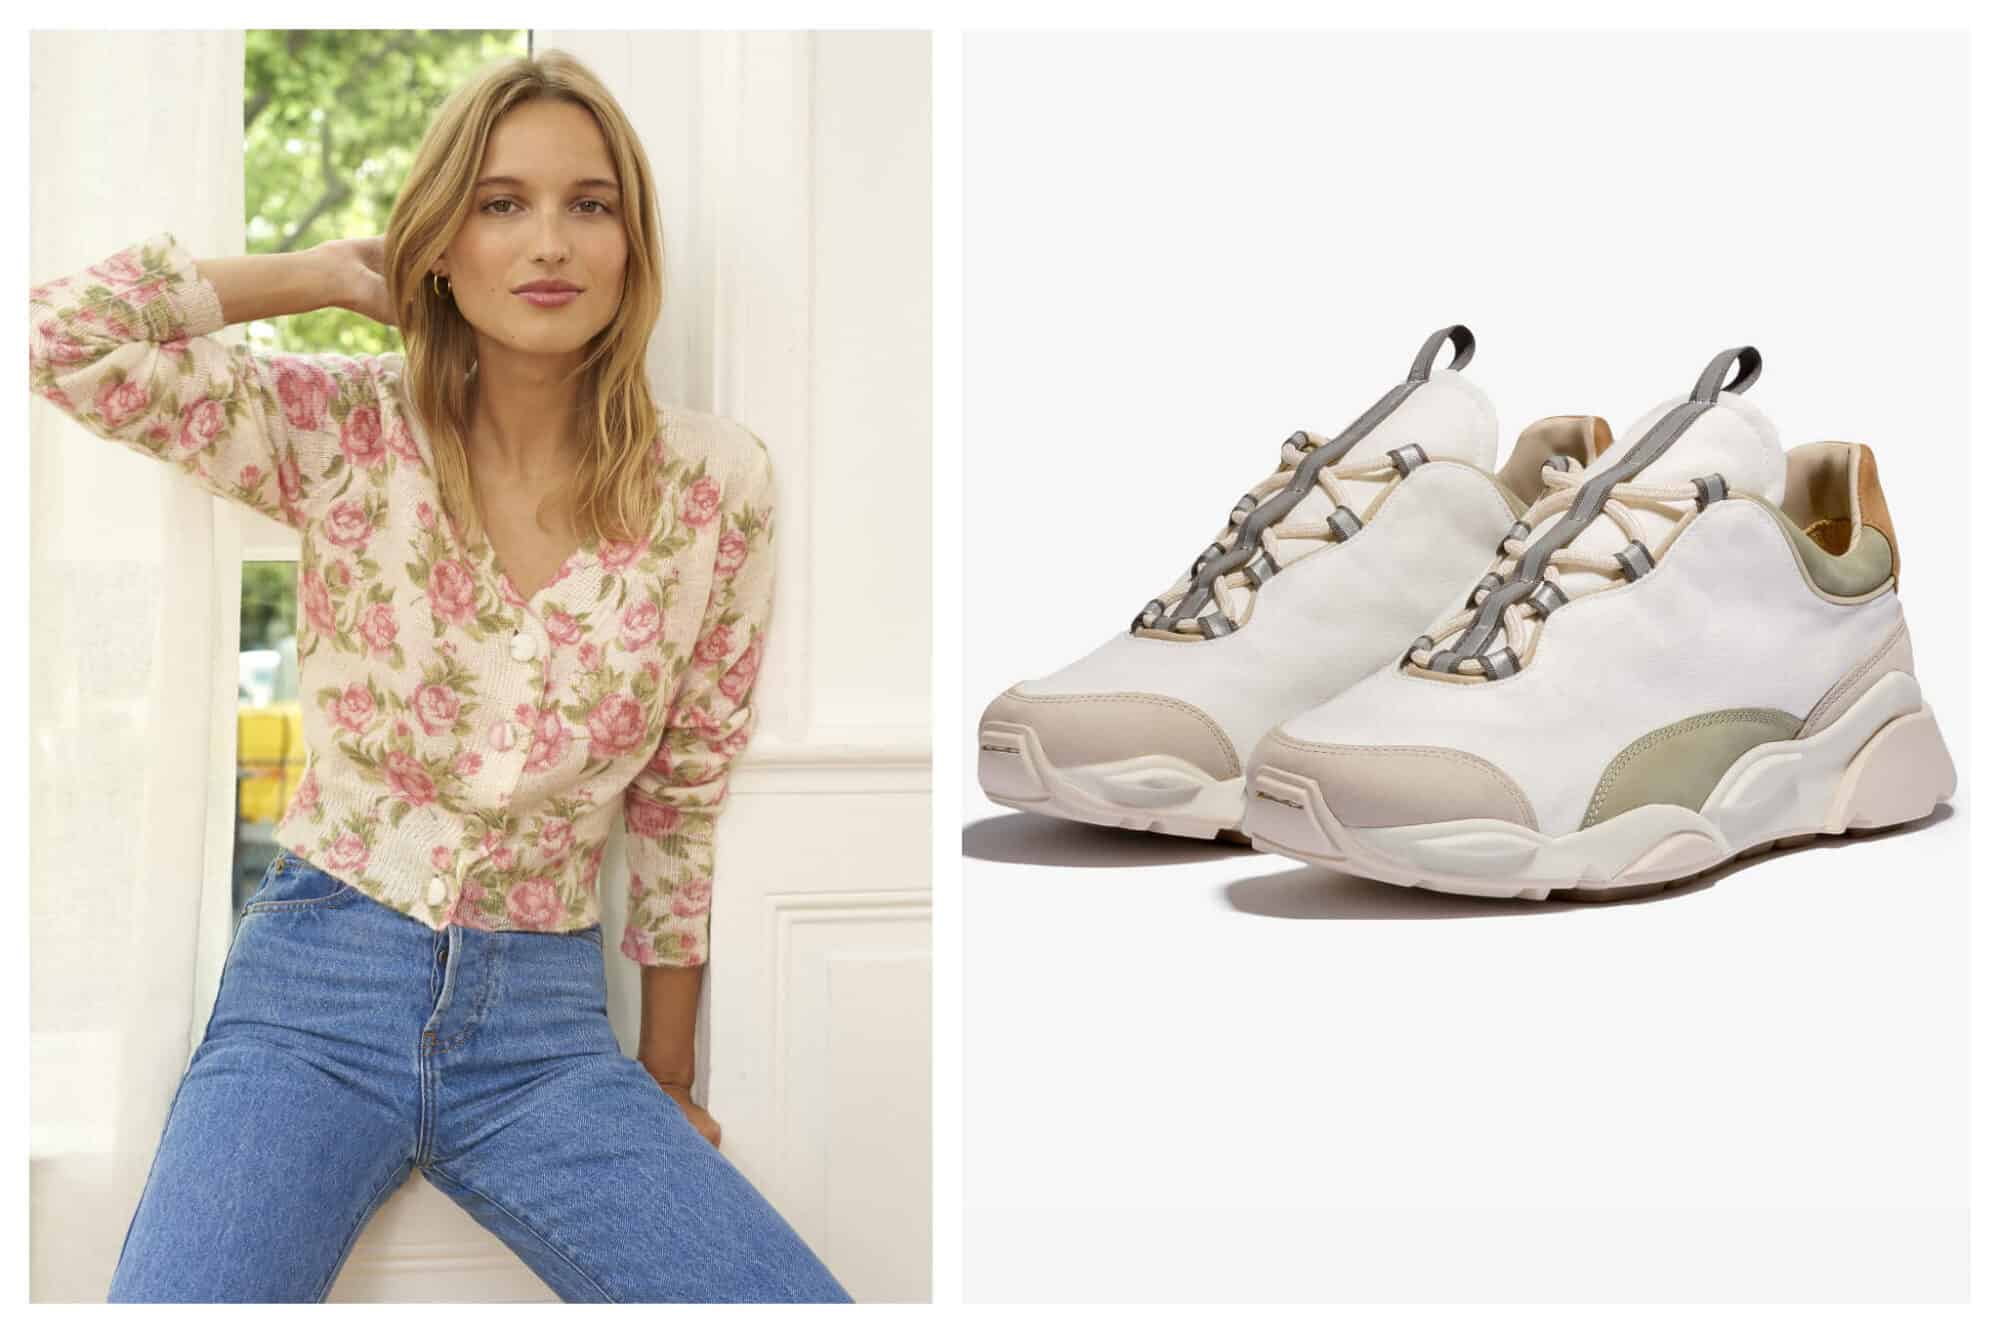 Right: A model with medium length blond hair wear a floral print sweater and blue jeans.
Left: A pair of beige sneakers.